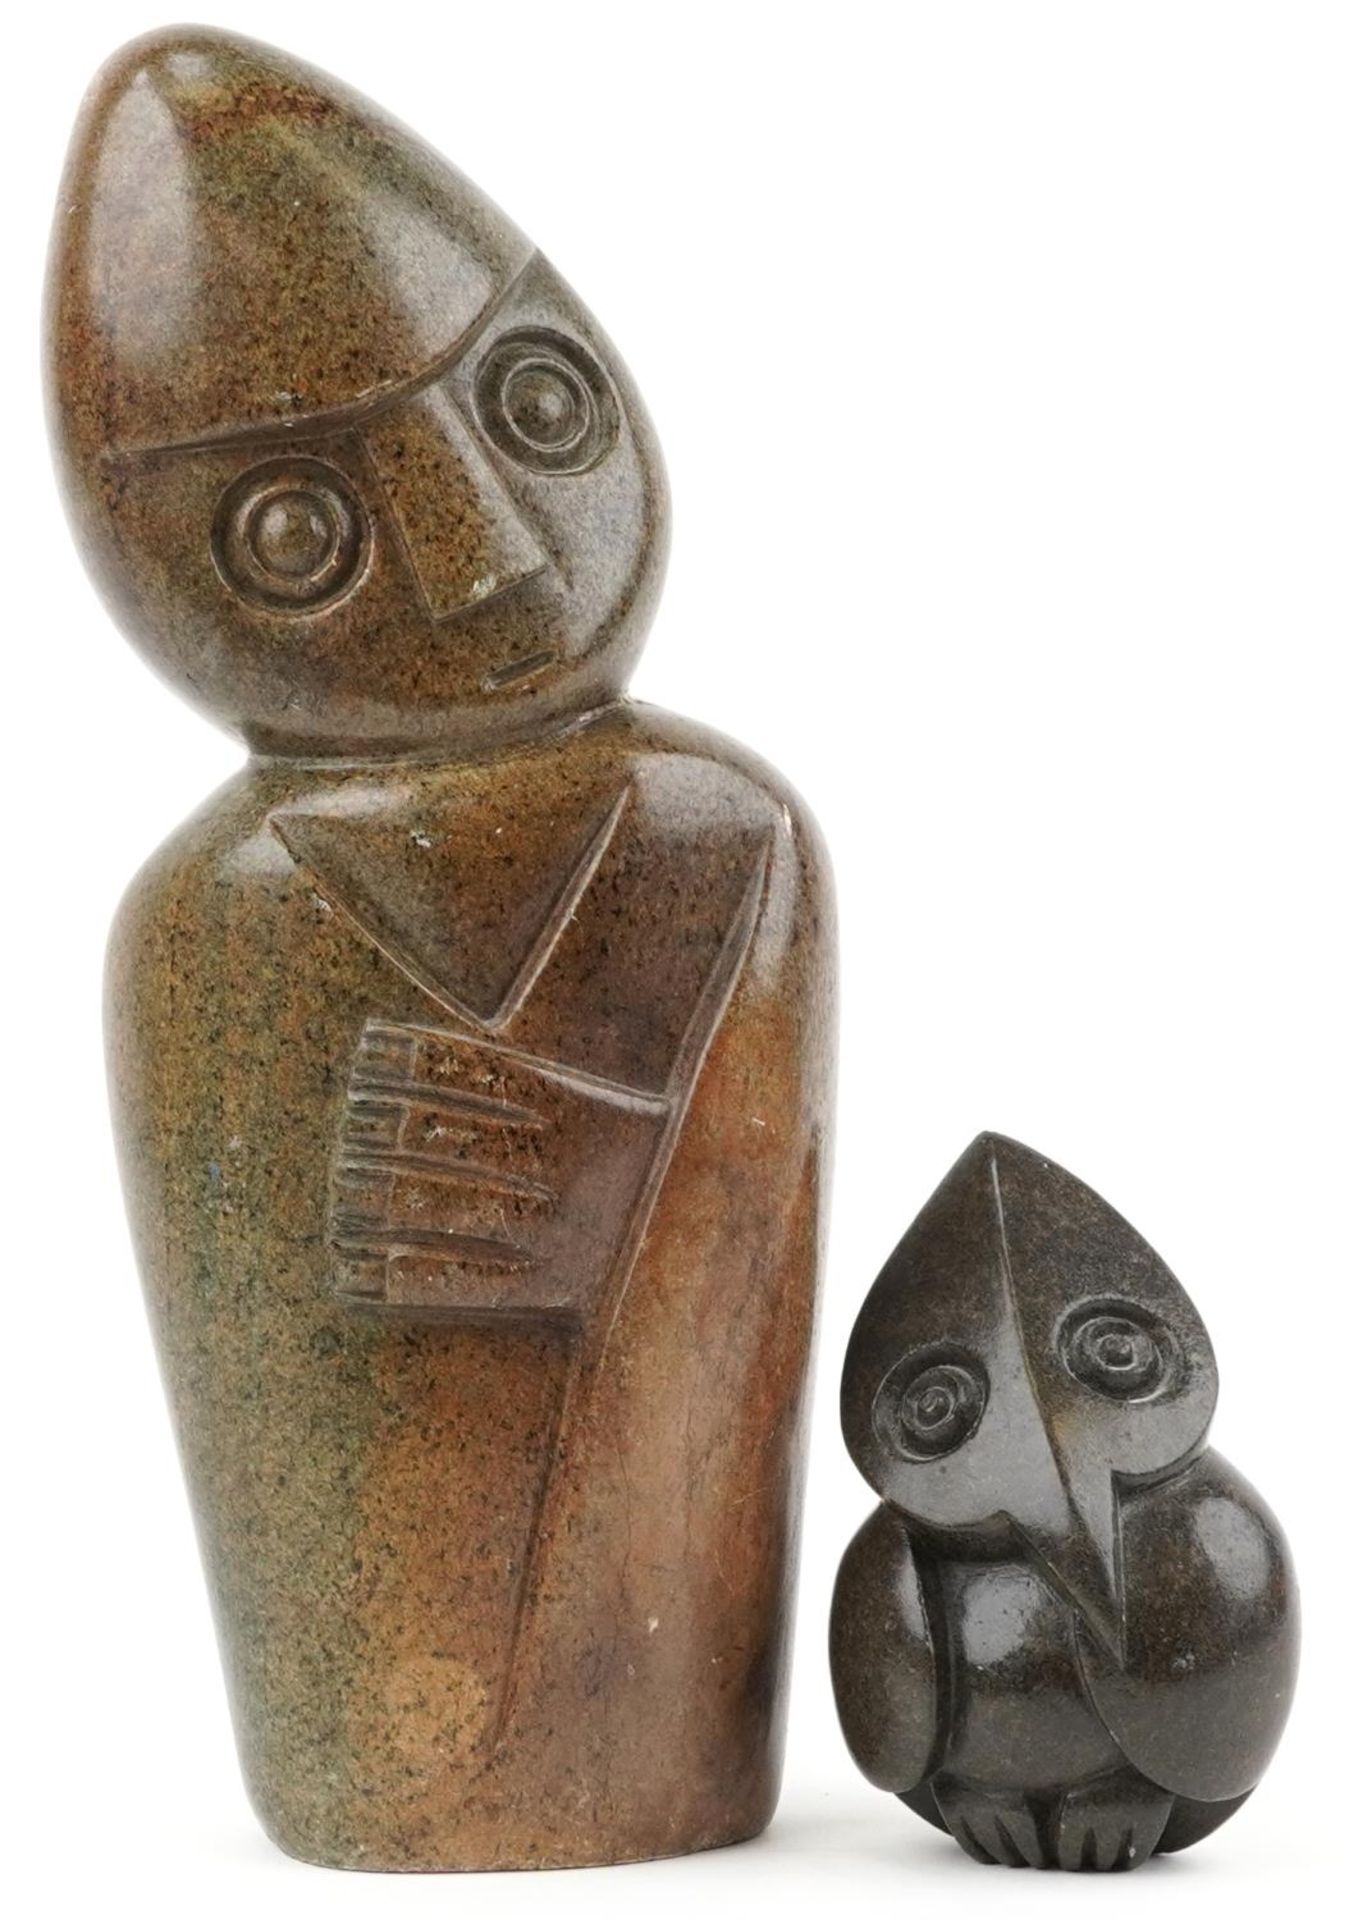 Edward Chiwawa, mid century Zimbabwean figural stone carving and a similar example of a stylised